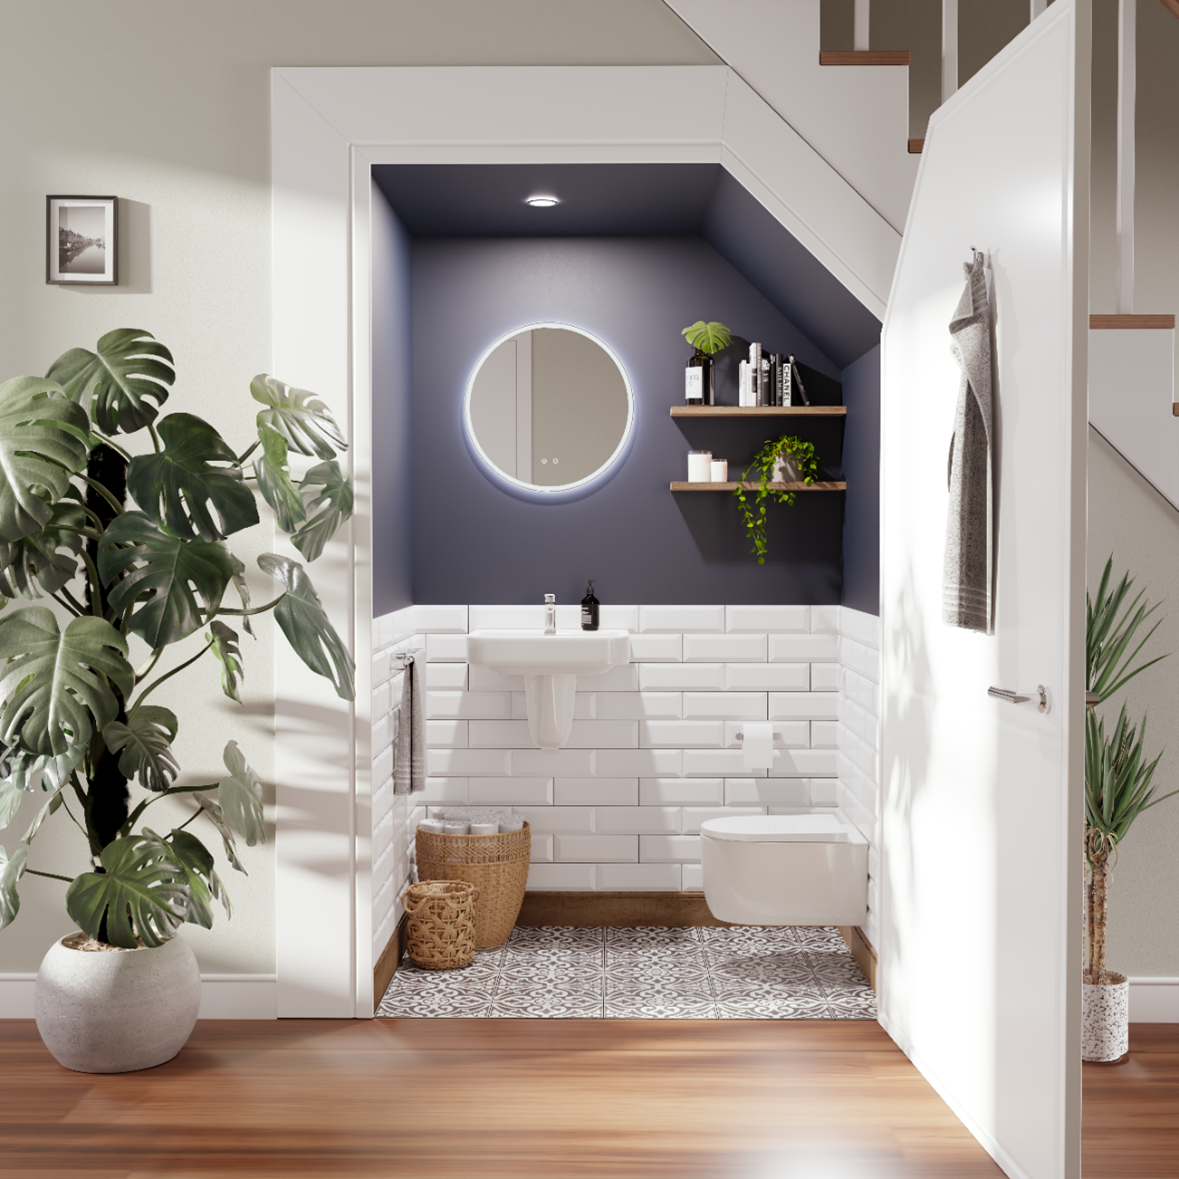 Cloakroom Bathroom Under Stairs with a Wall-Hung Toilet, Semi-Pedestal Basin, and a Round LED Mirror